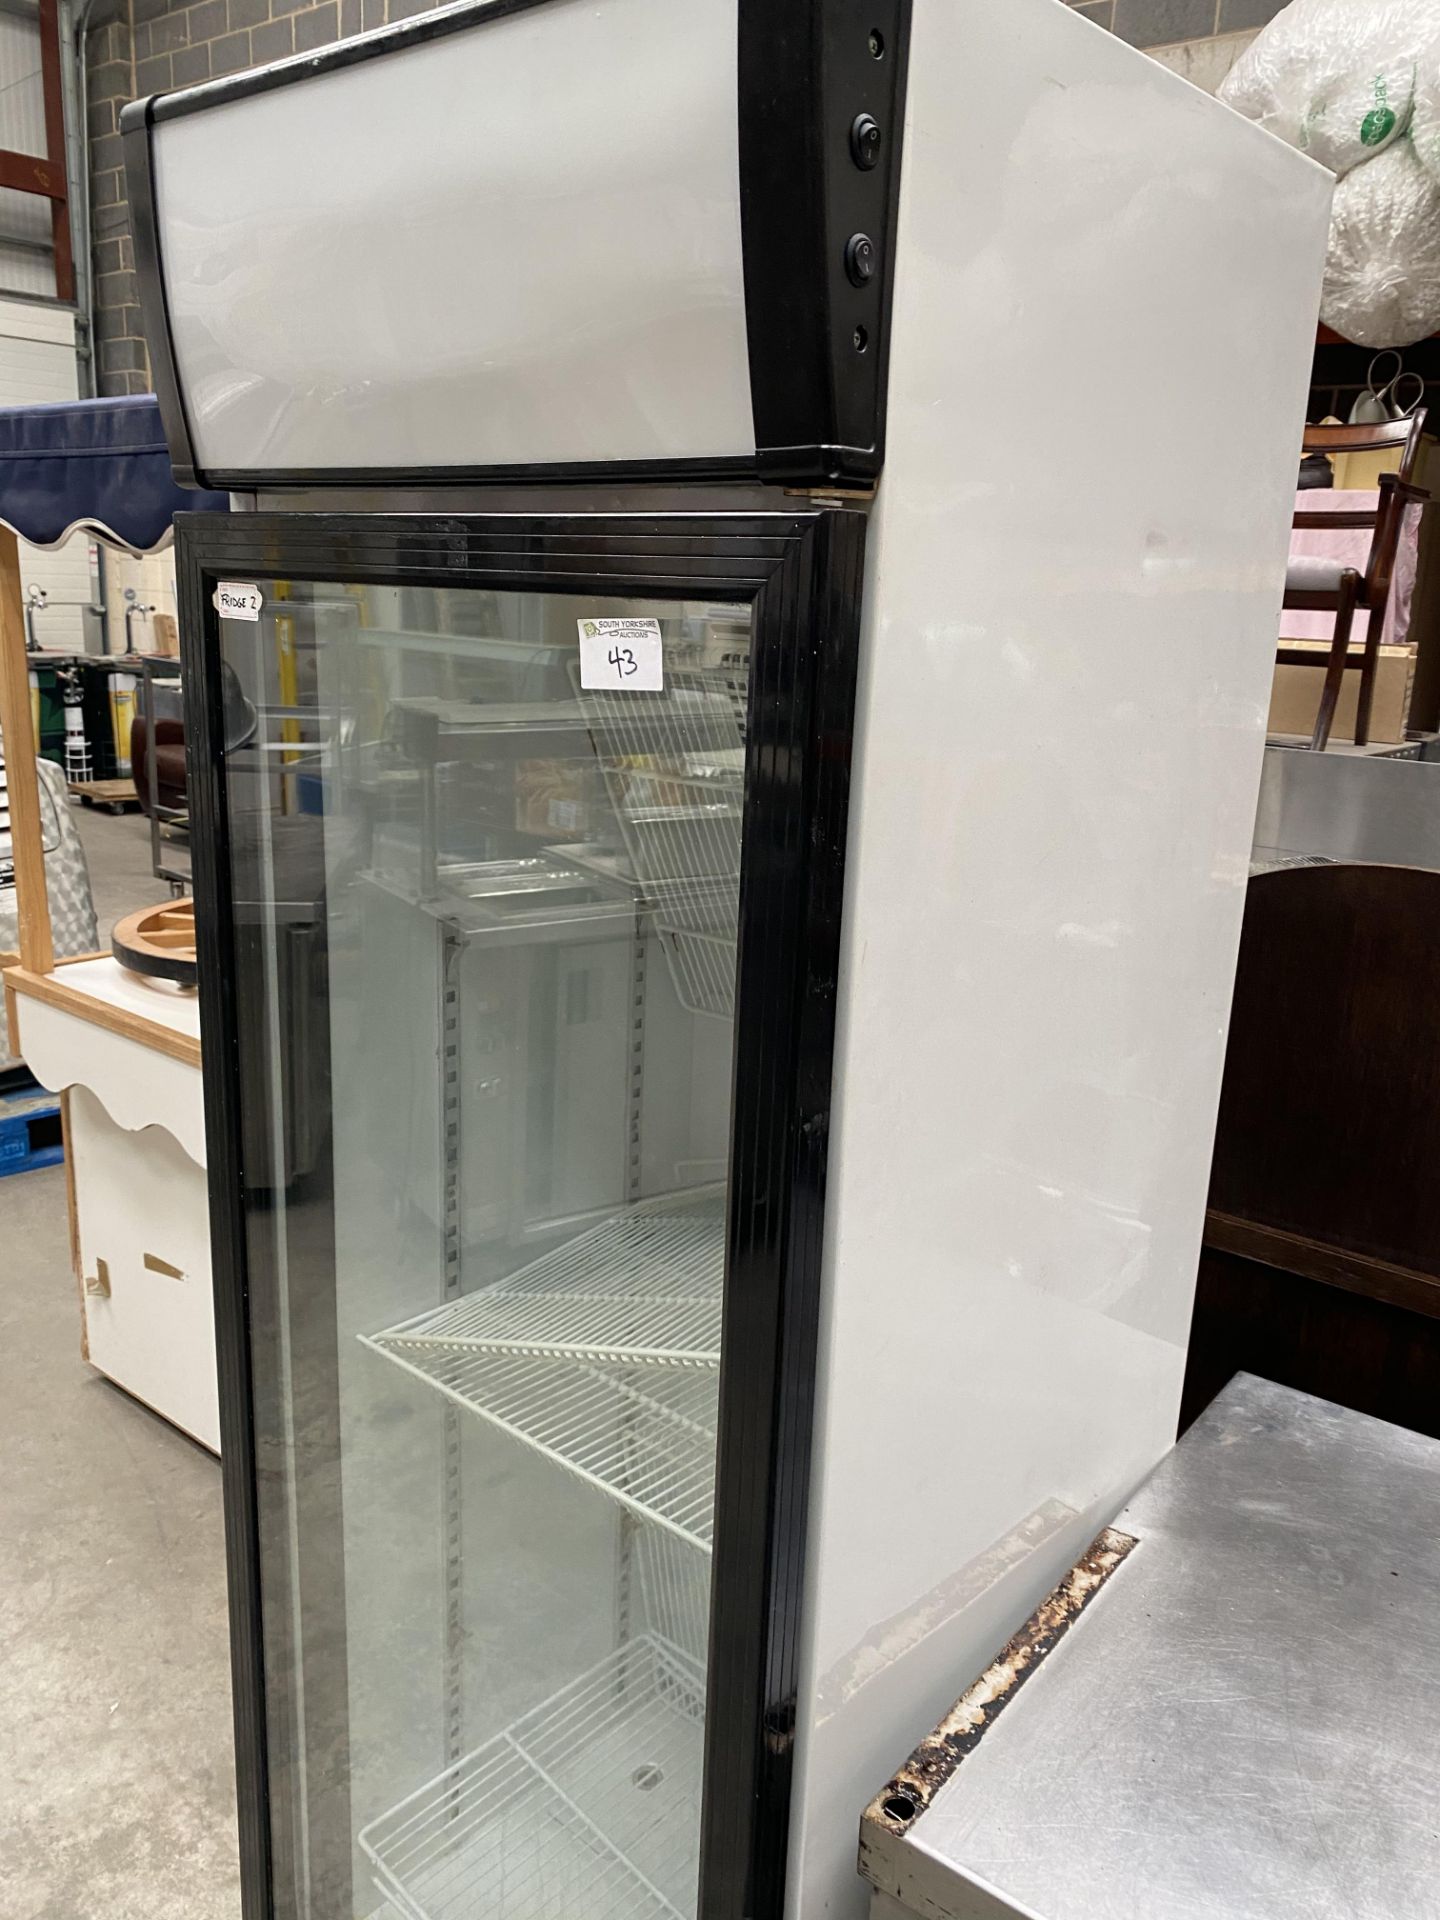 Upright Fridge with See Through Door - Image 2 of 2